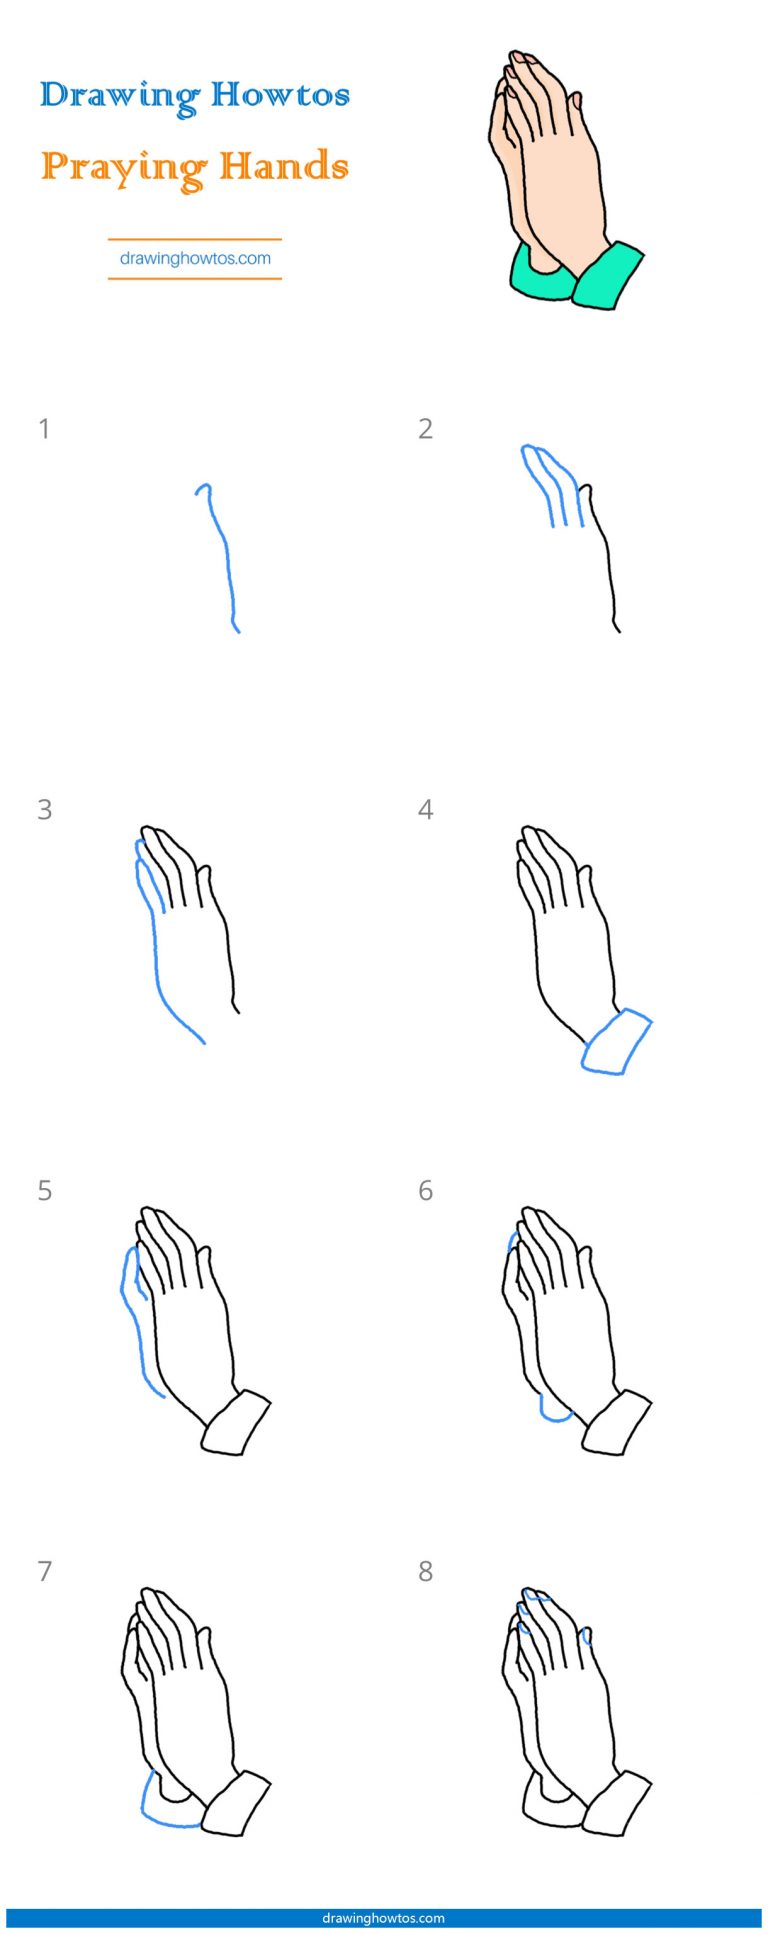 How To Draw Praying Hands Easy Step By Step Drawing Tutorial Easy